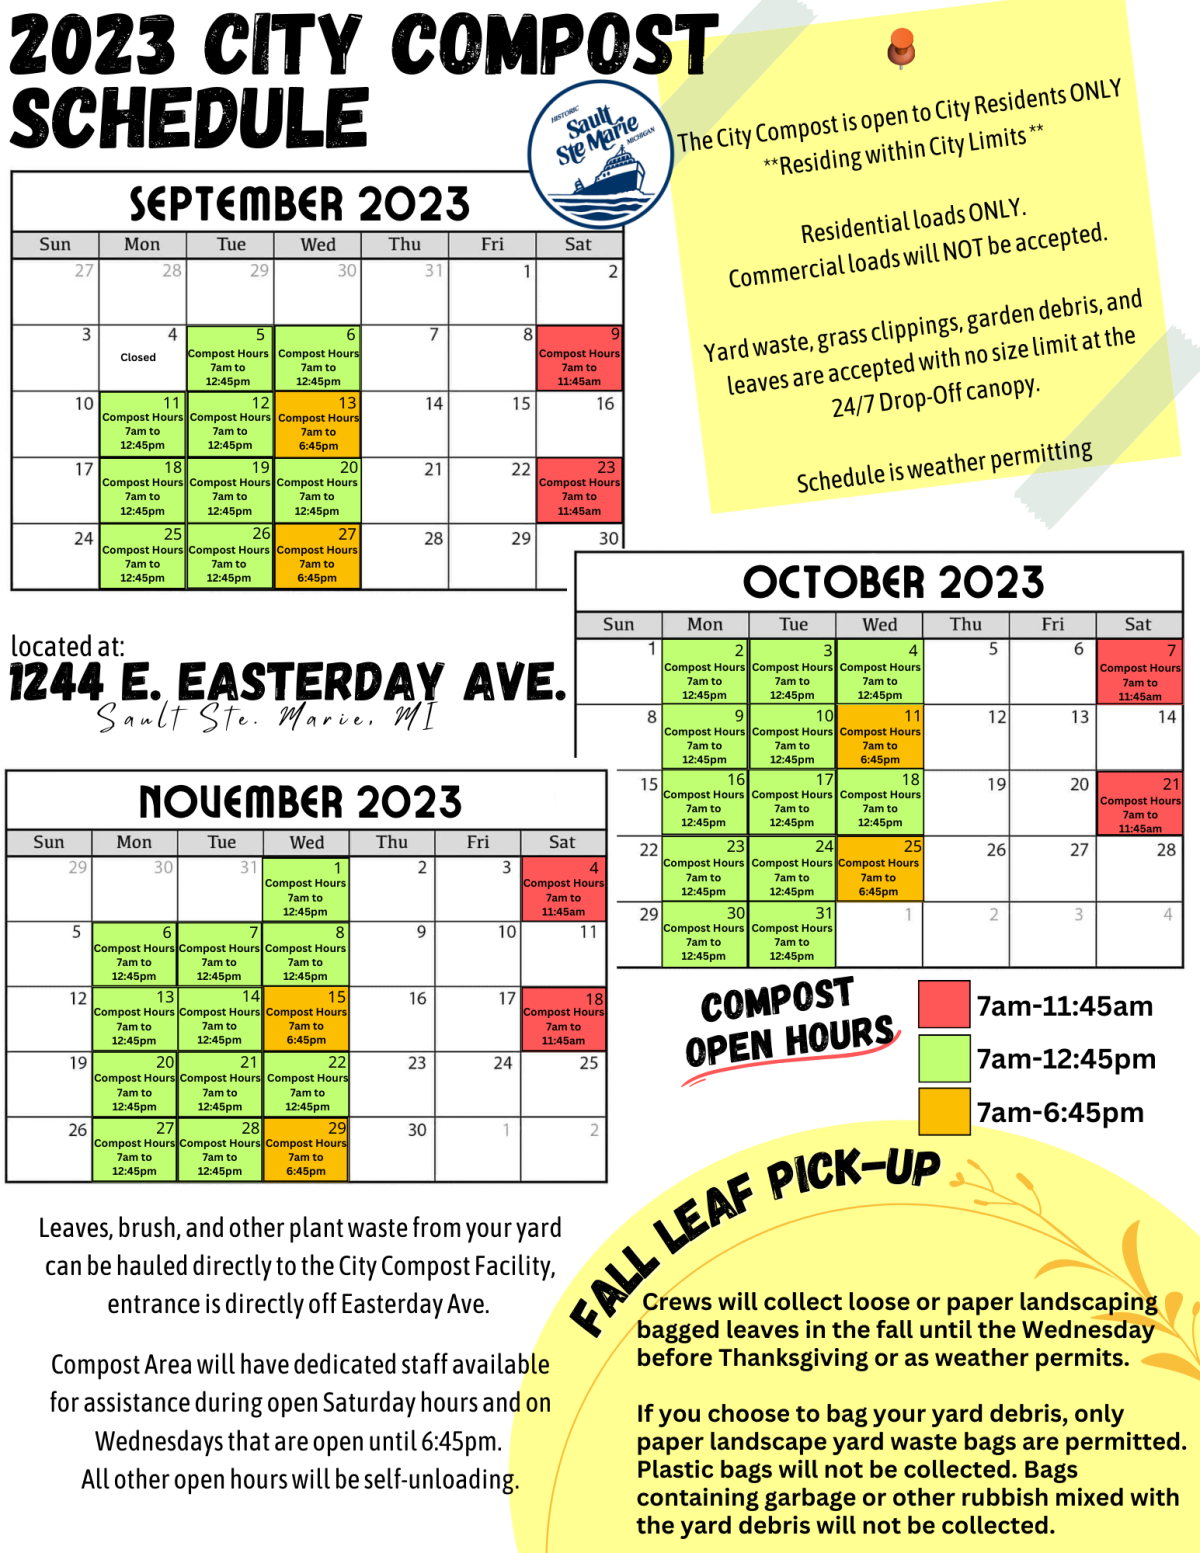 Fall 2023 City Compost Hours